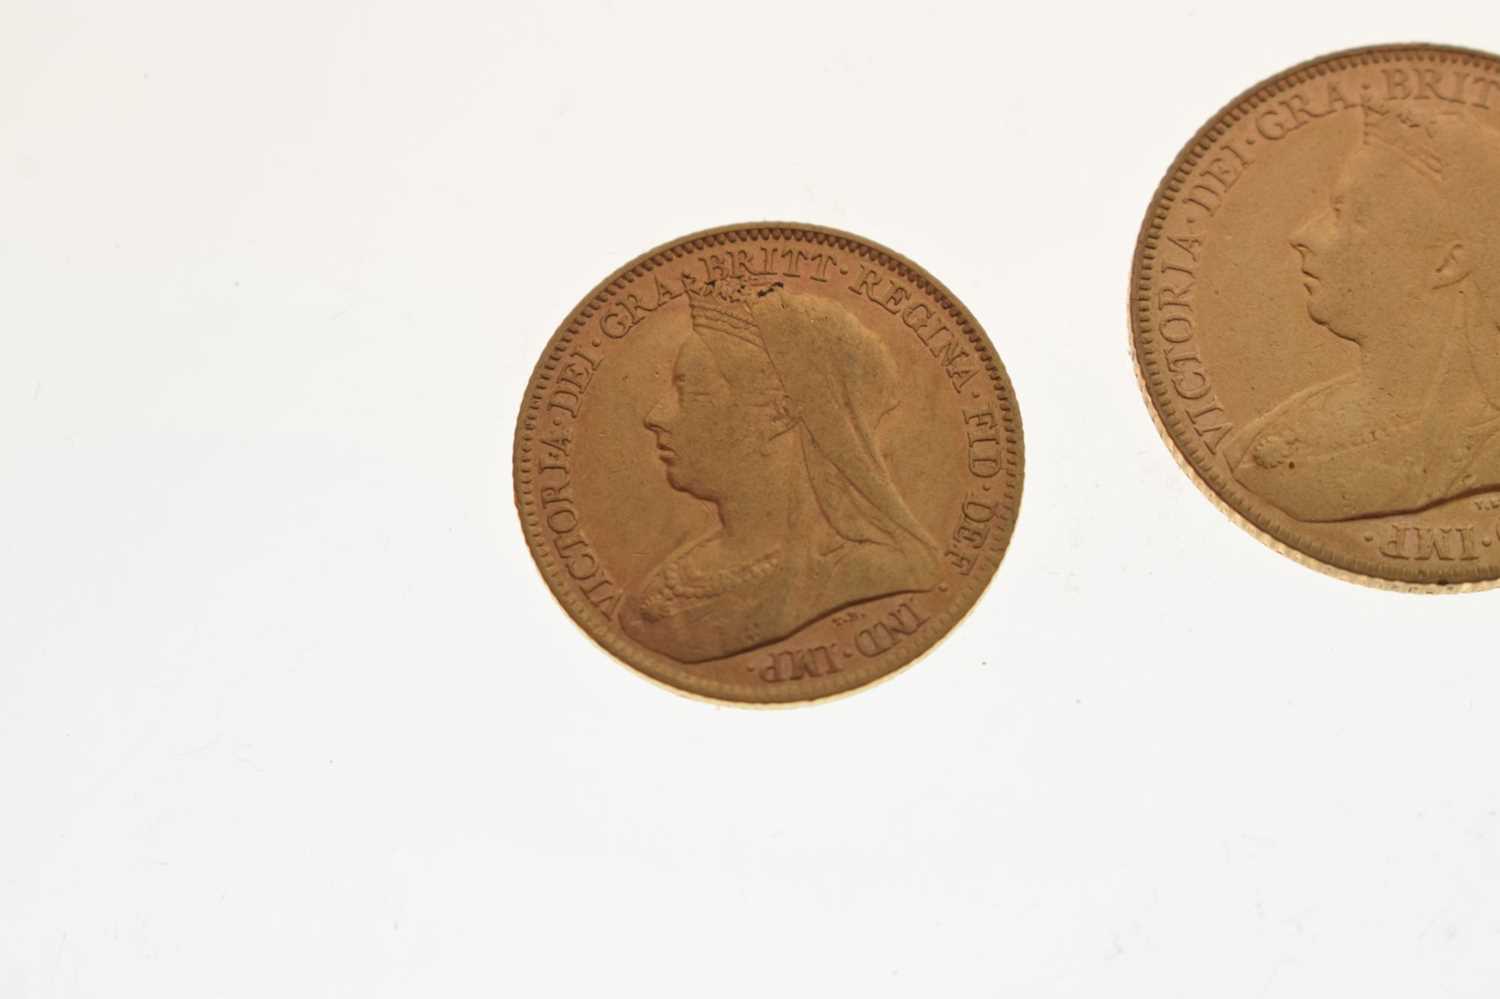 Queen Victoria gold sovereign, 1900, and a gold half sovereign, 1848 - Image 6 of 7